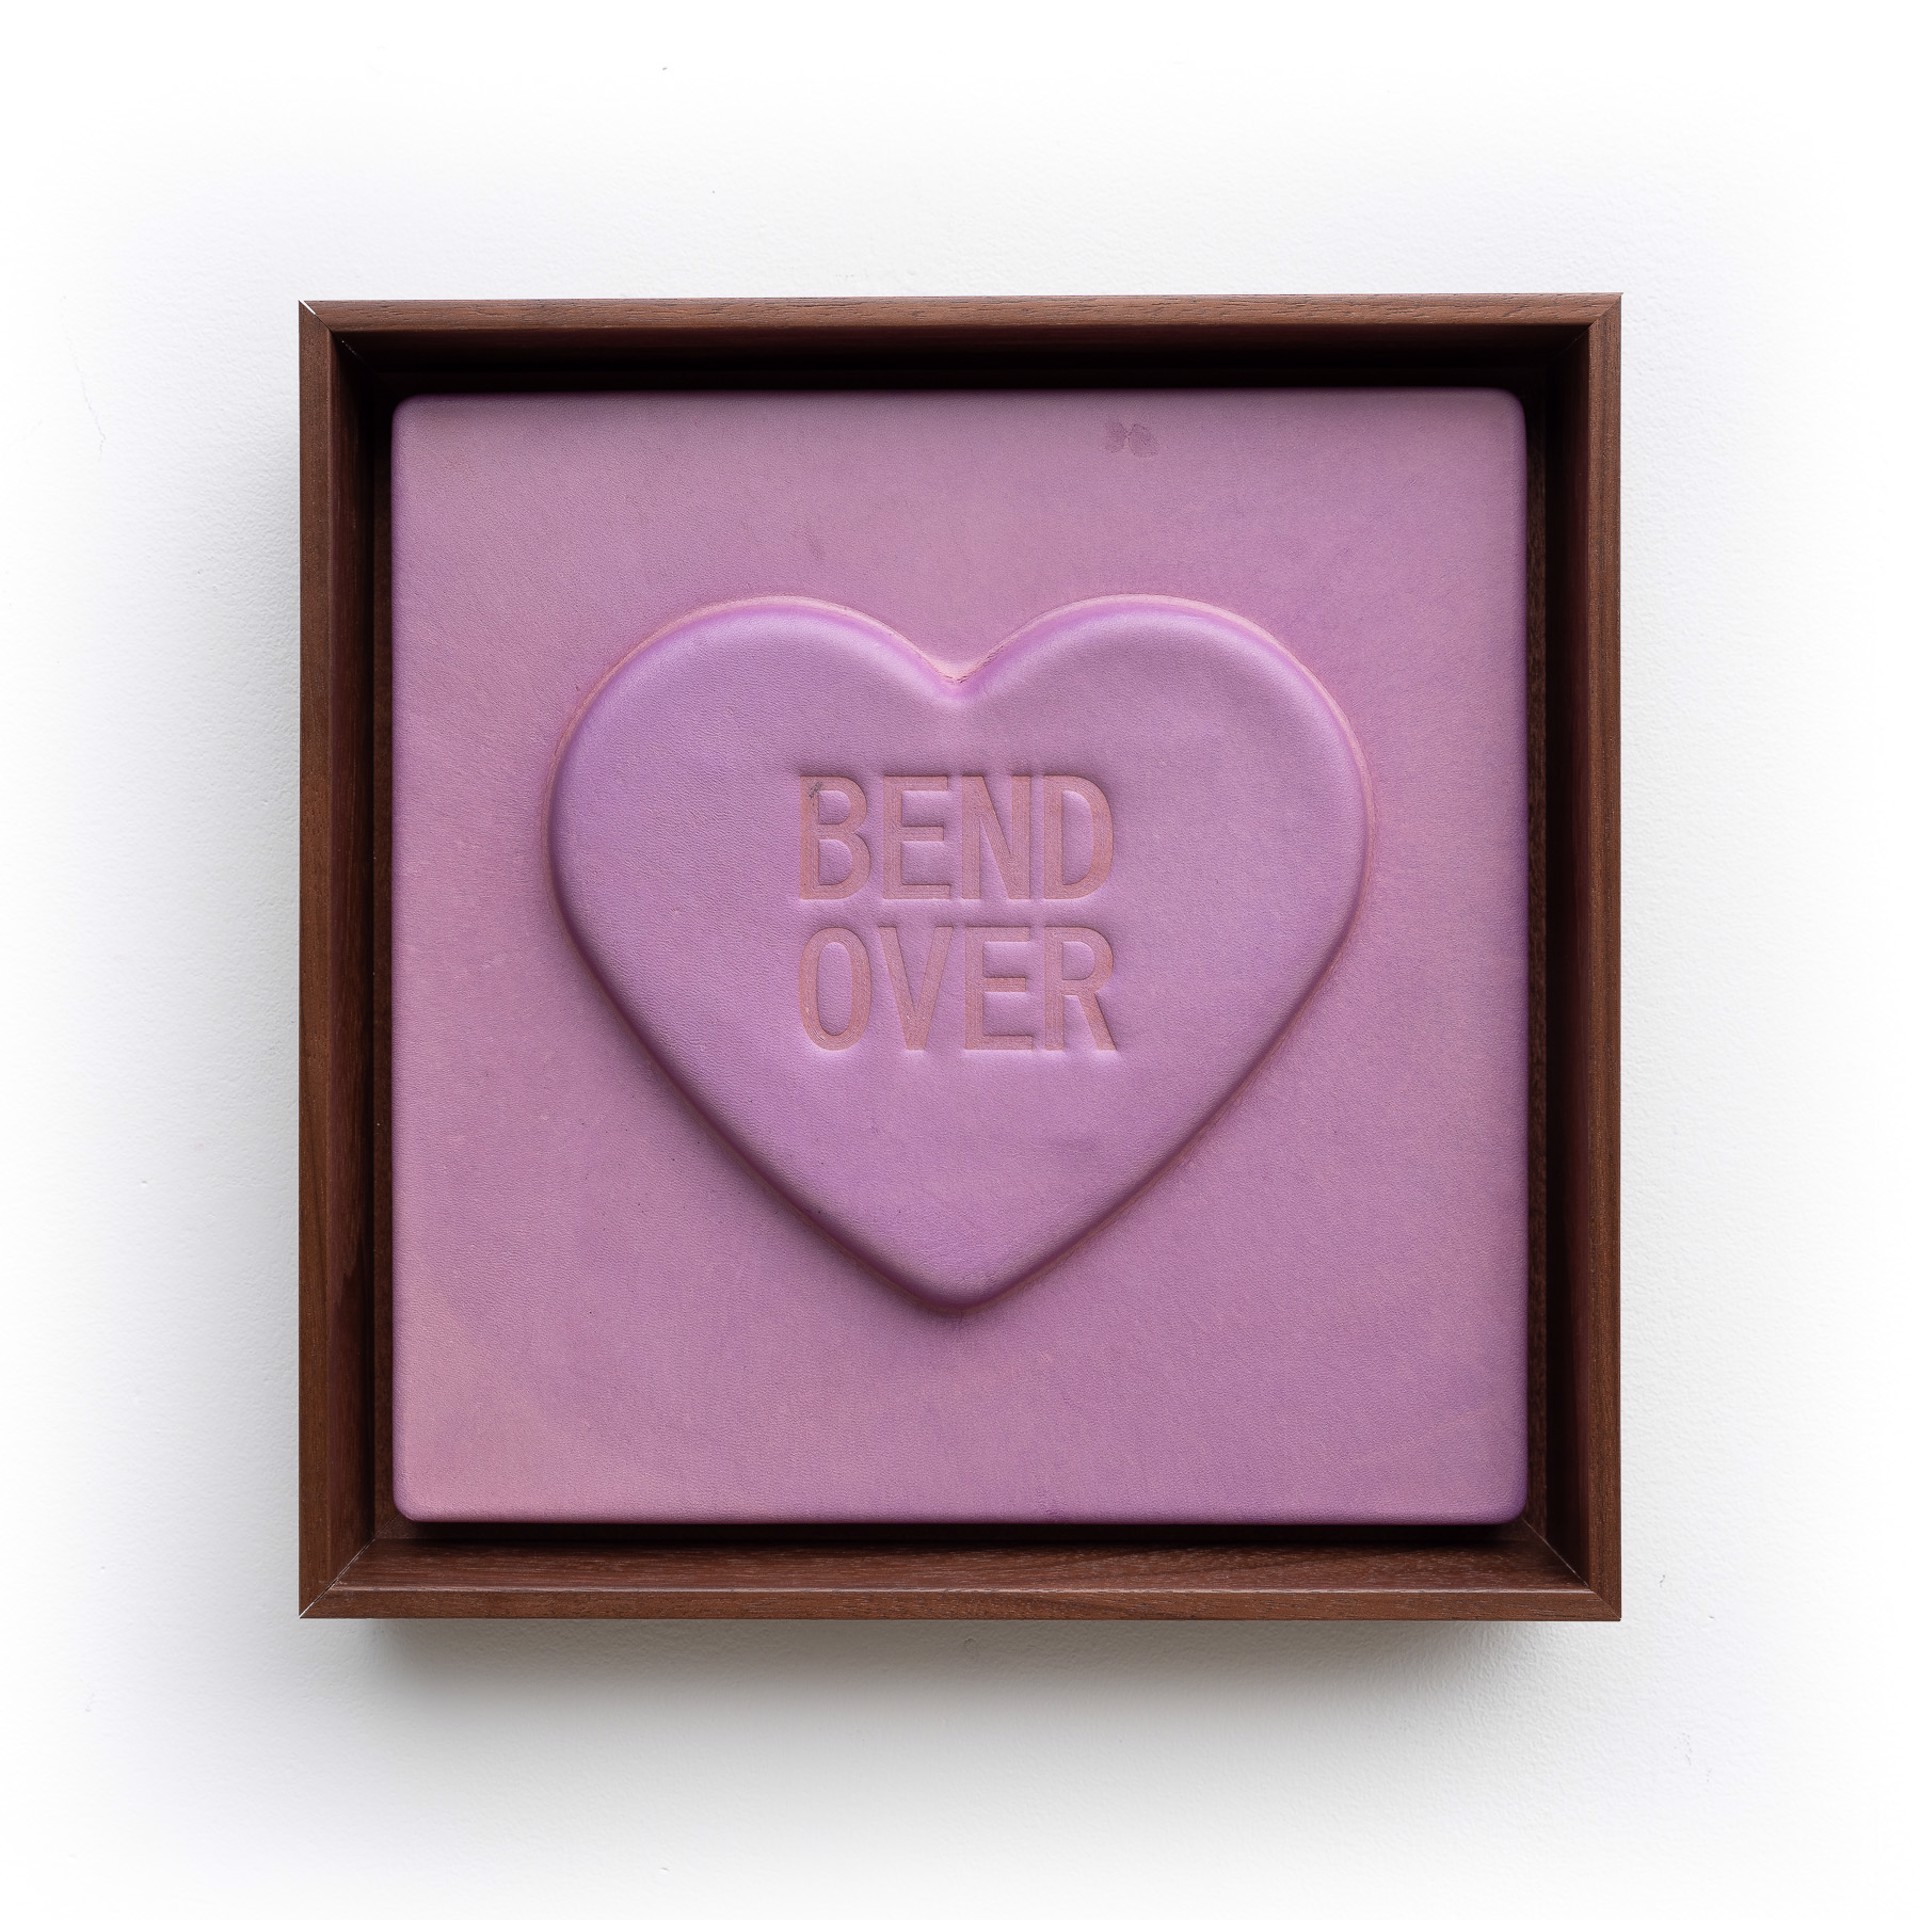 'BEND OVER' - Sweetheart series by Mx. Hyde